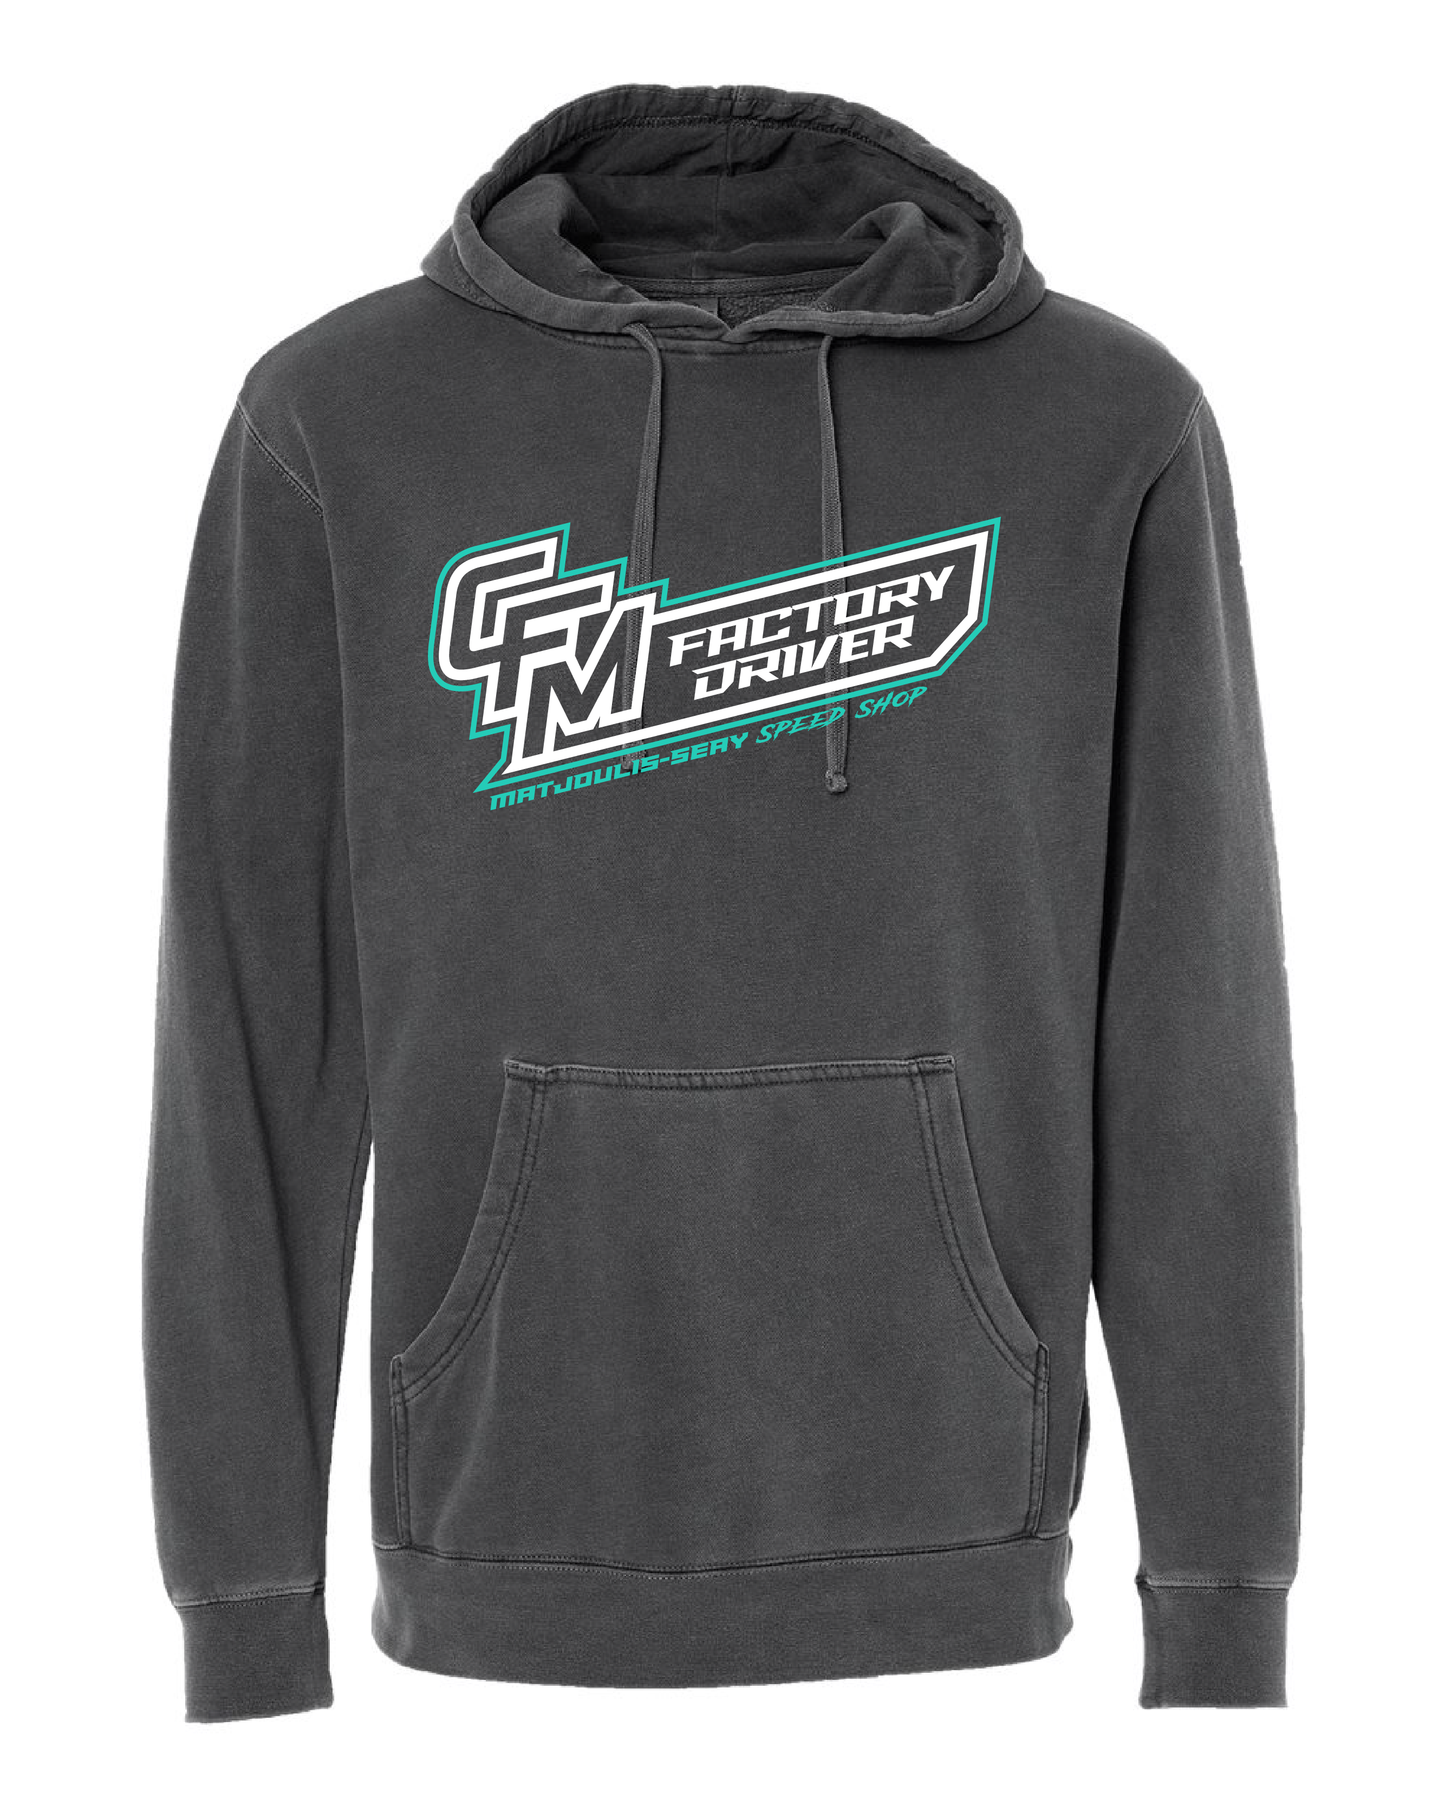 CFM Factory Driver - Hoodie Midweight